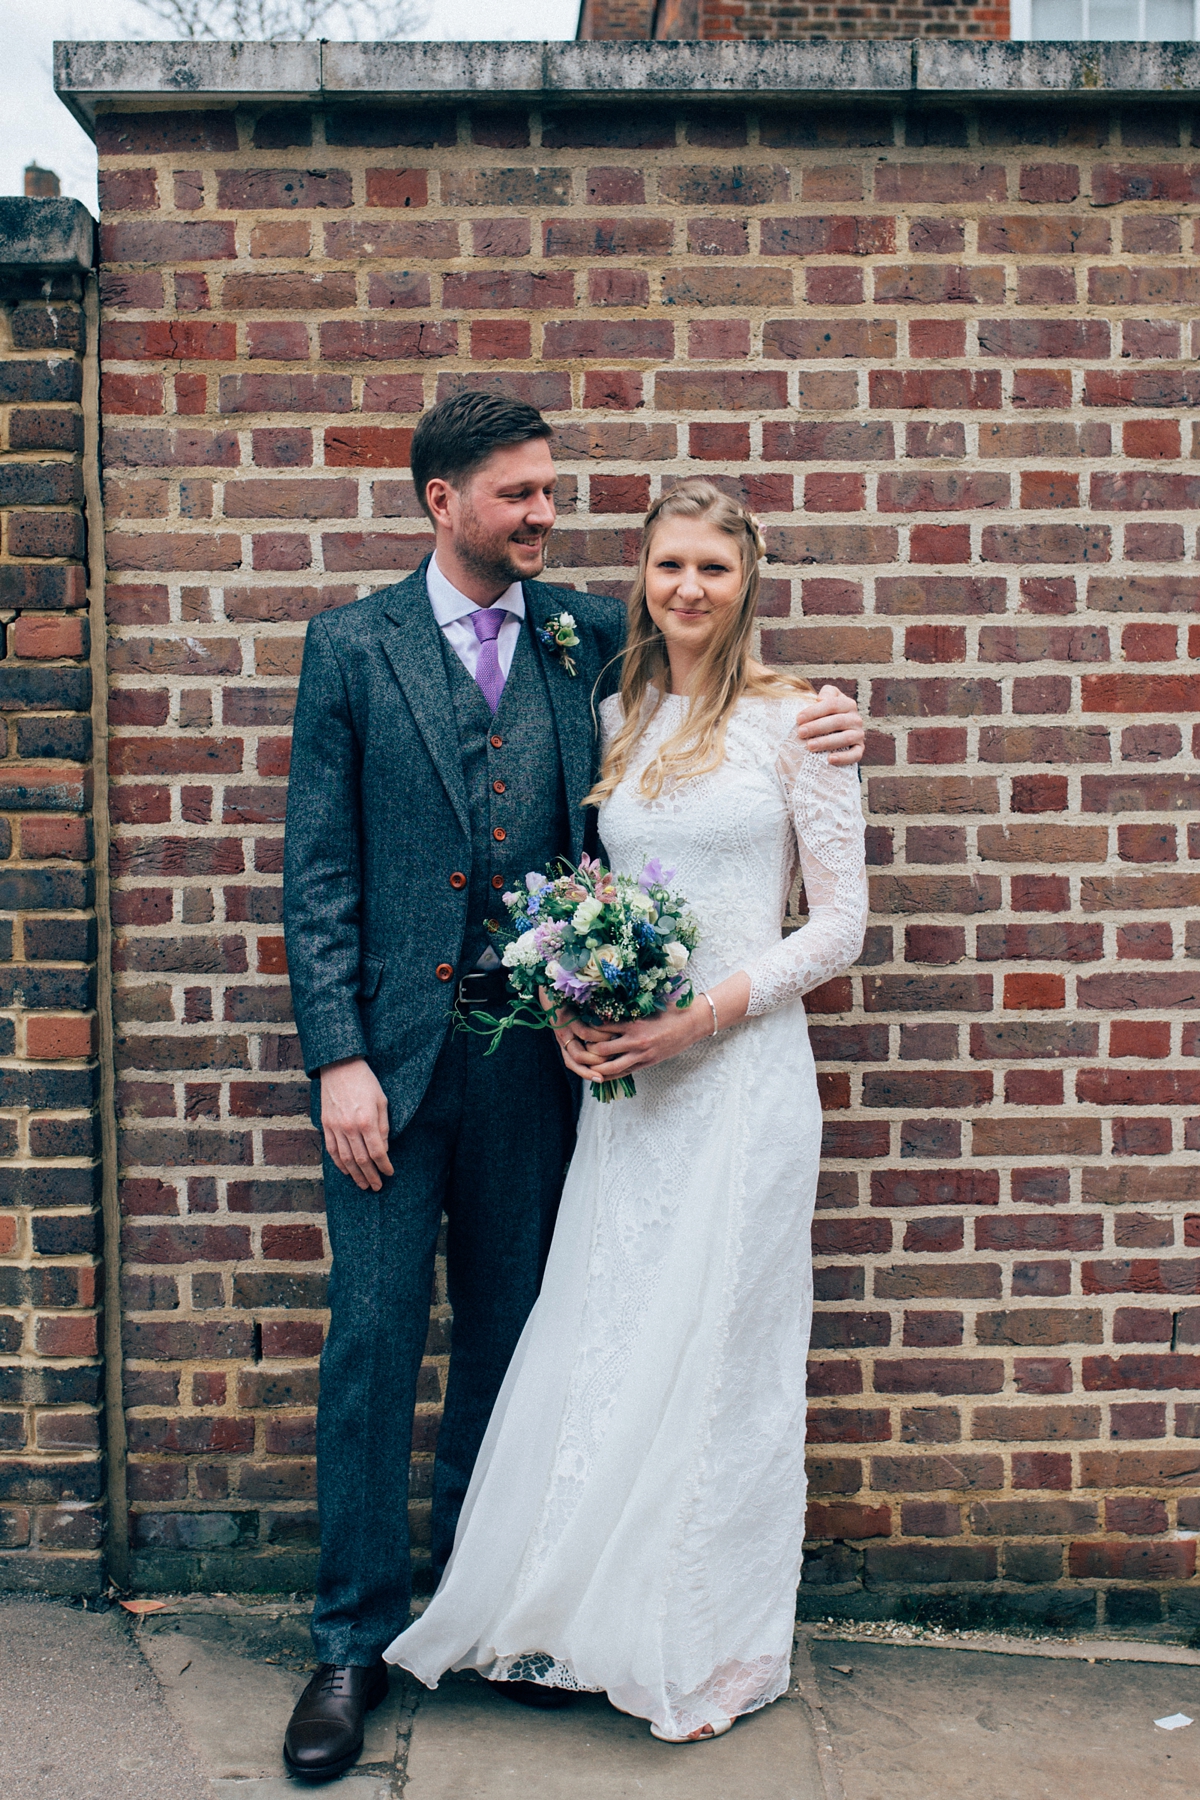 19 A Grace Loves Lace gown for a woodland inspired London pub wedding. Images by Nikki van der Molen